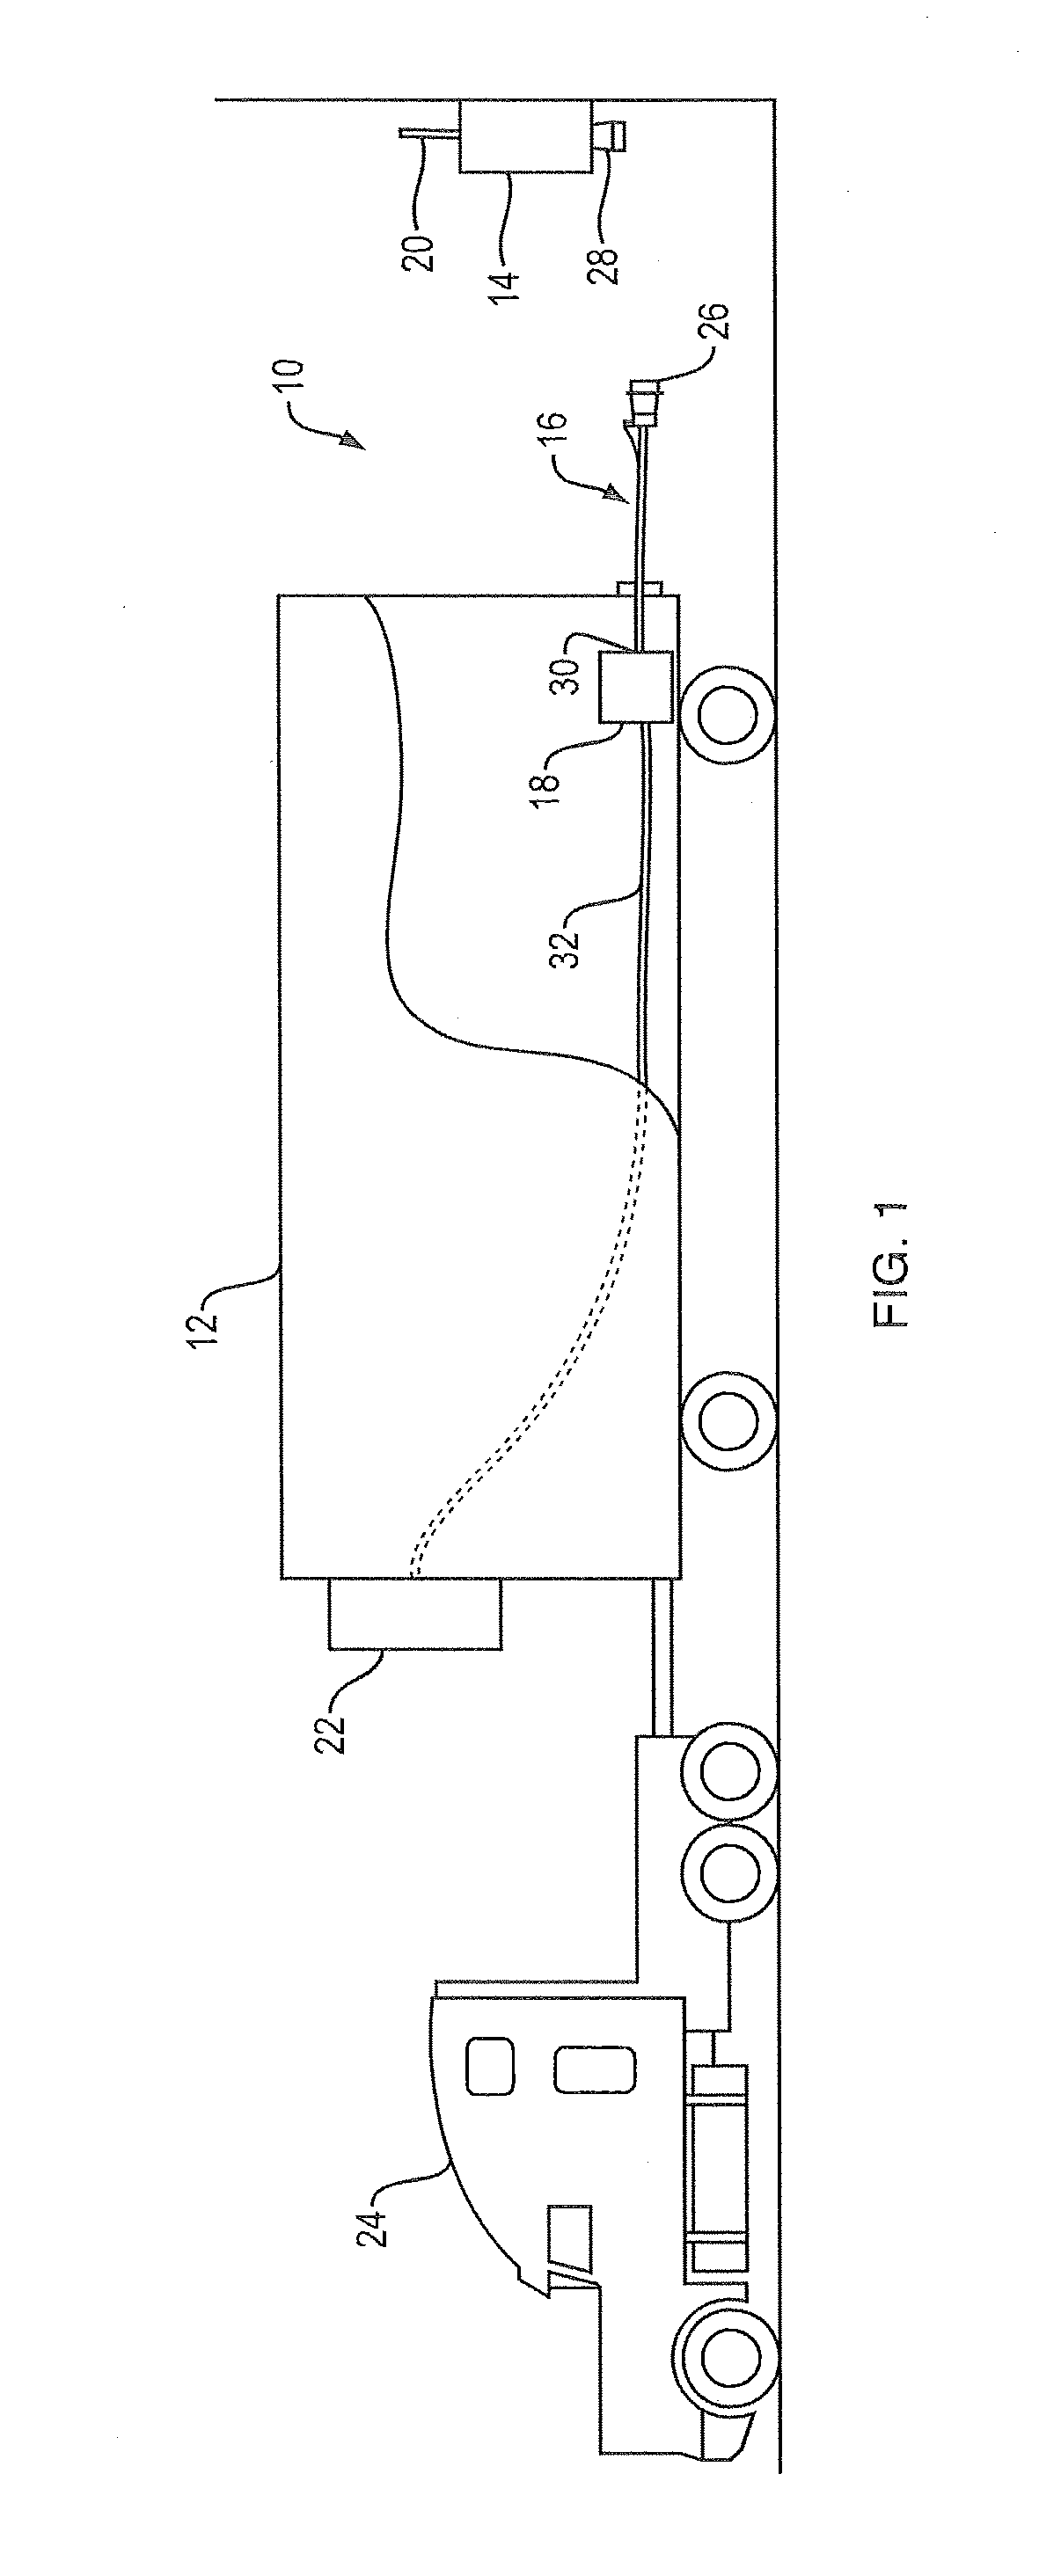 Power supply system including panel with safety release